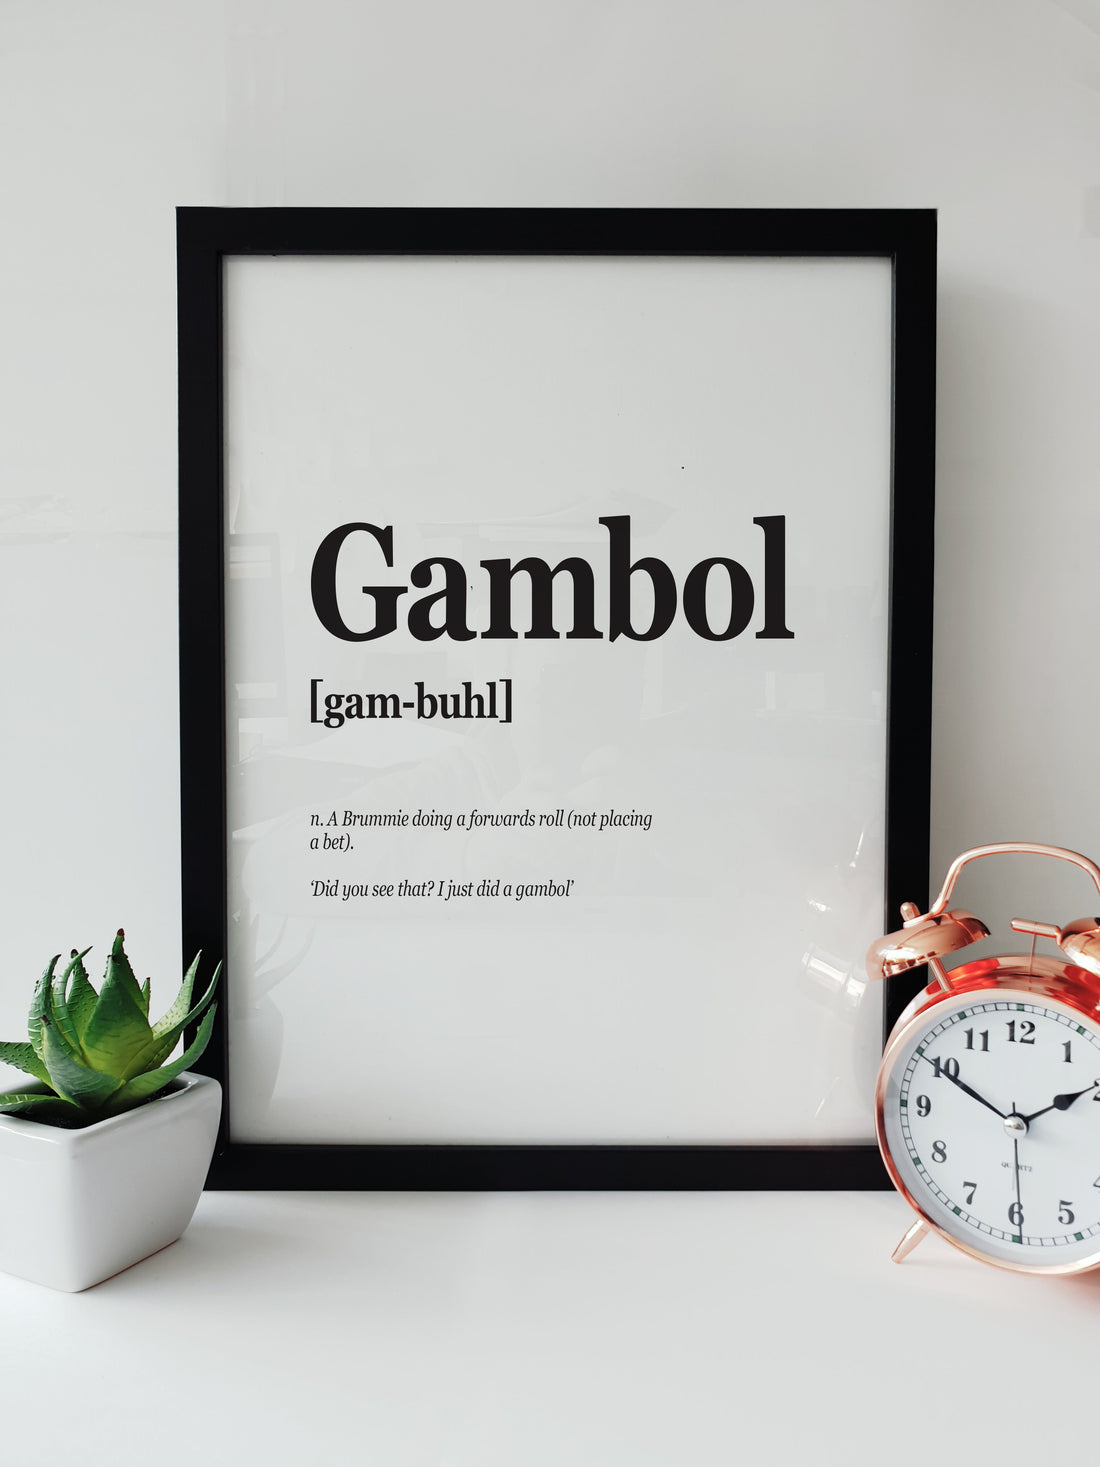 Gambol funny Brummie accent translation poster by Local Lingo